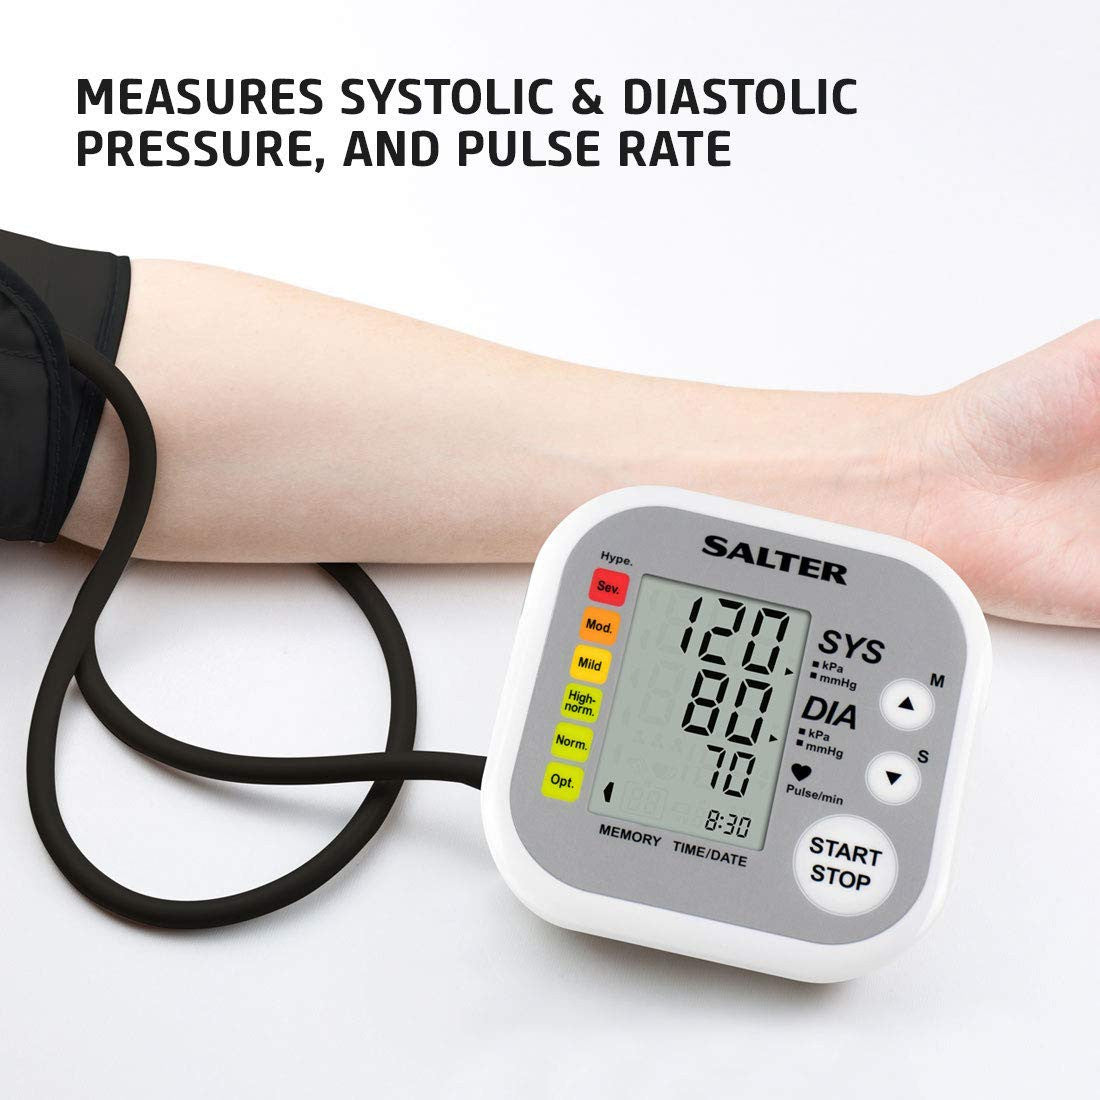 Salter by Homedics BPA-9201 Automatic Arm Blood Pressure Monitor